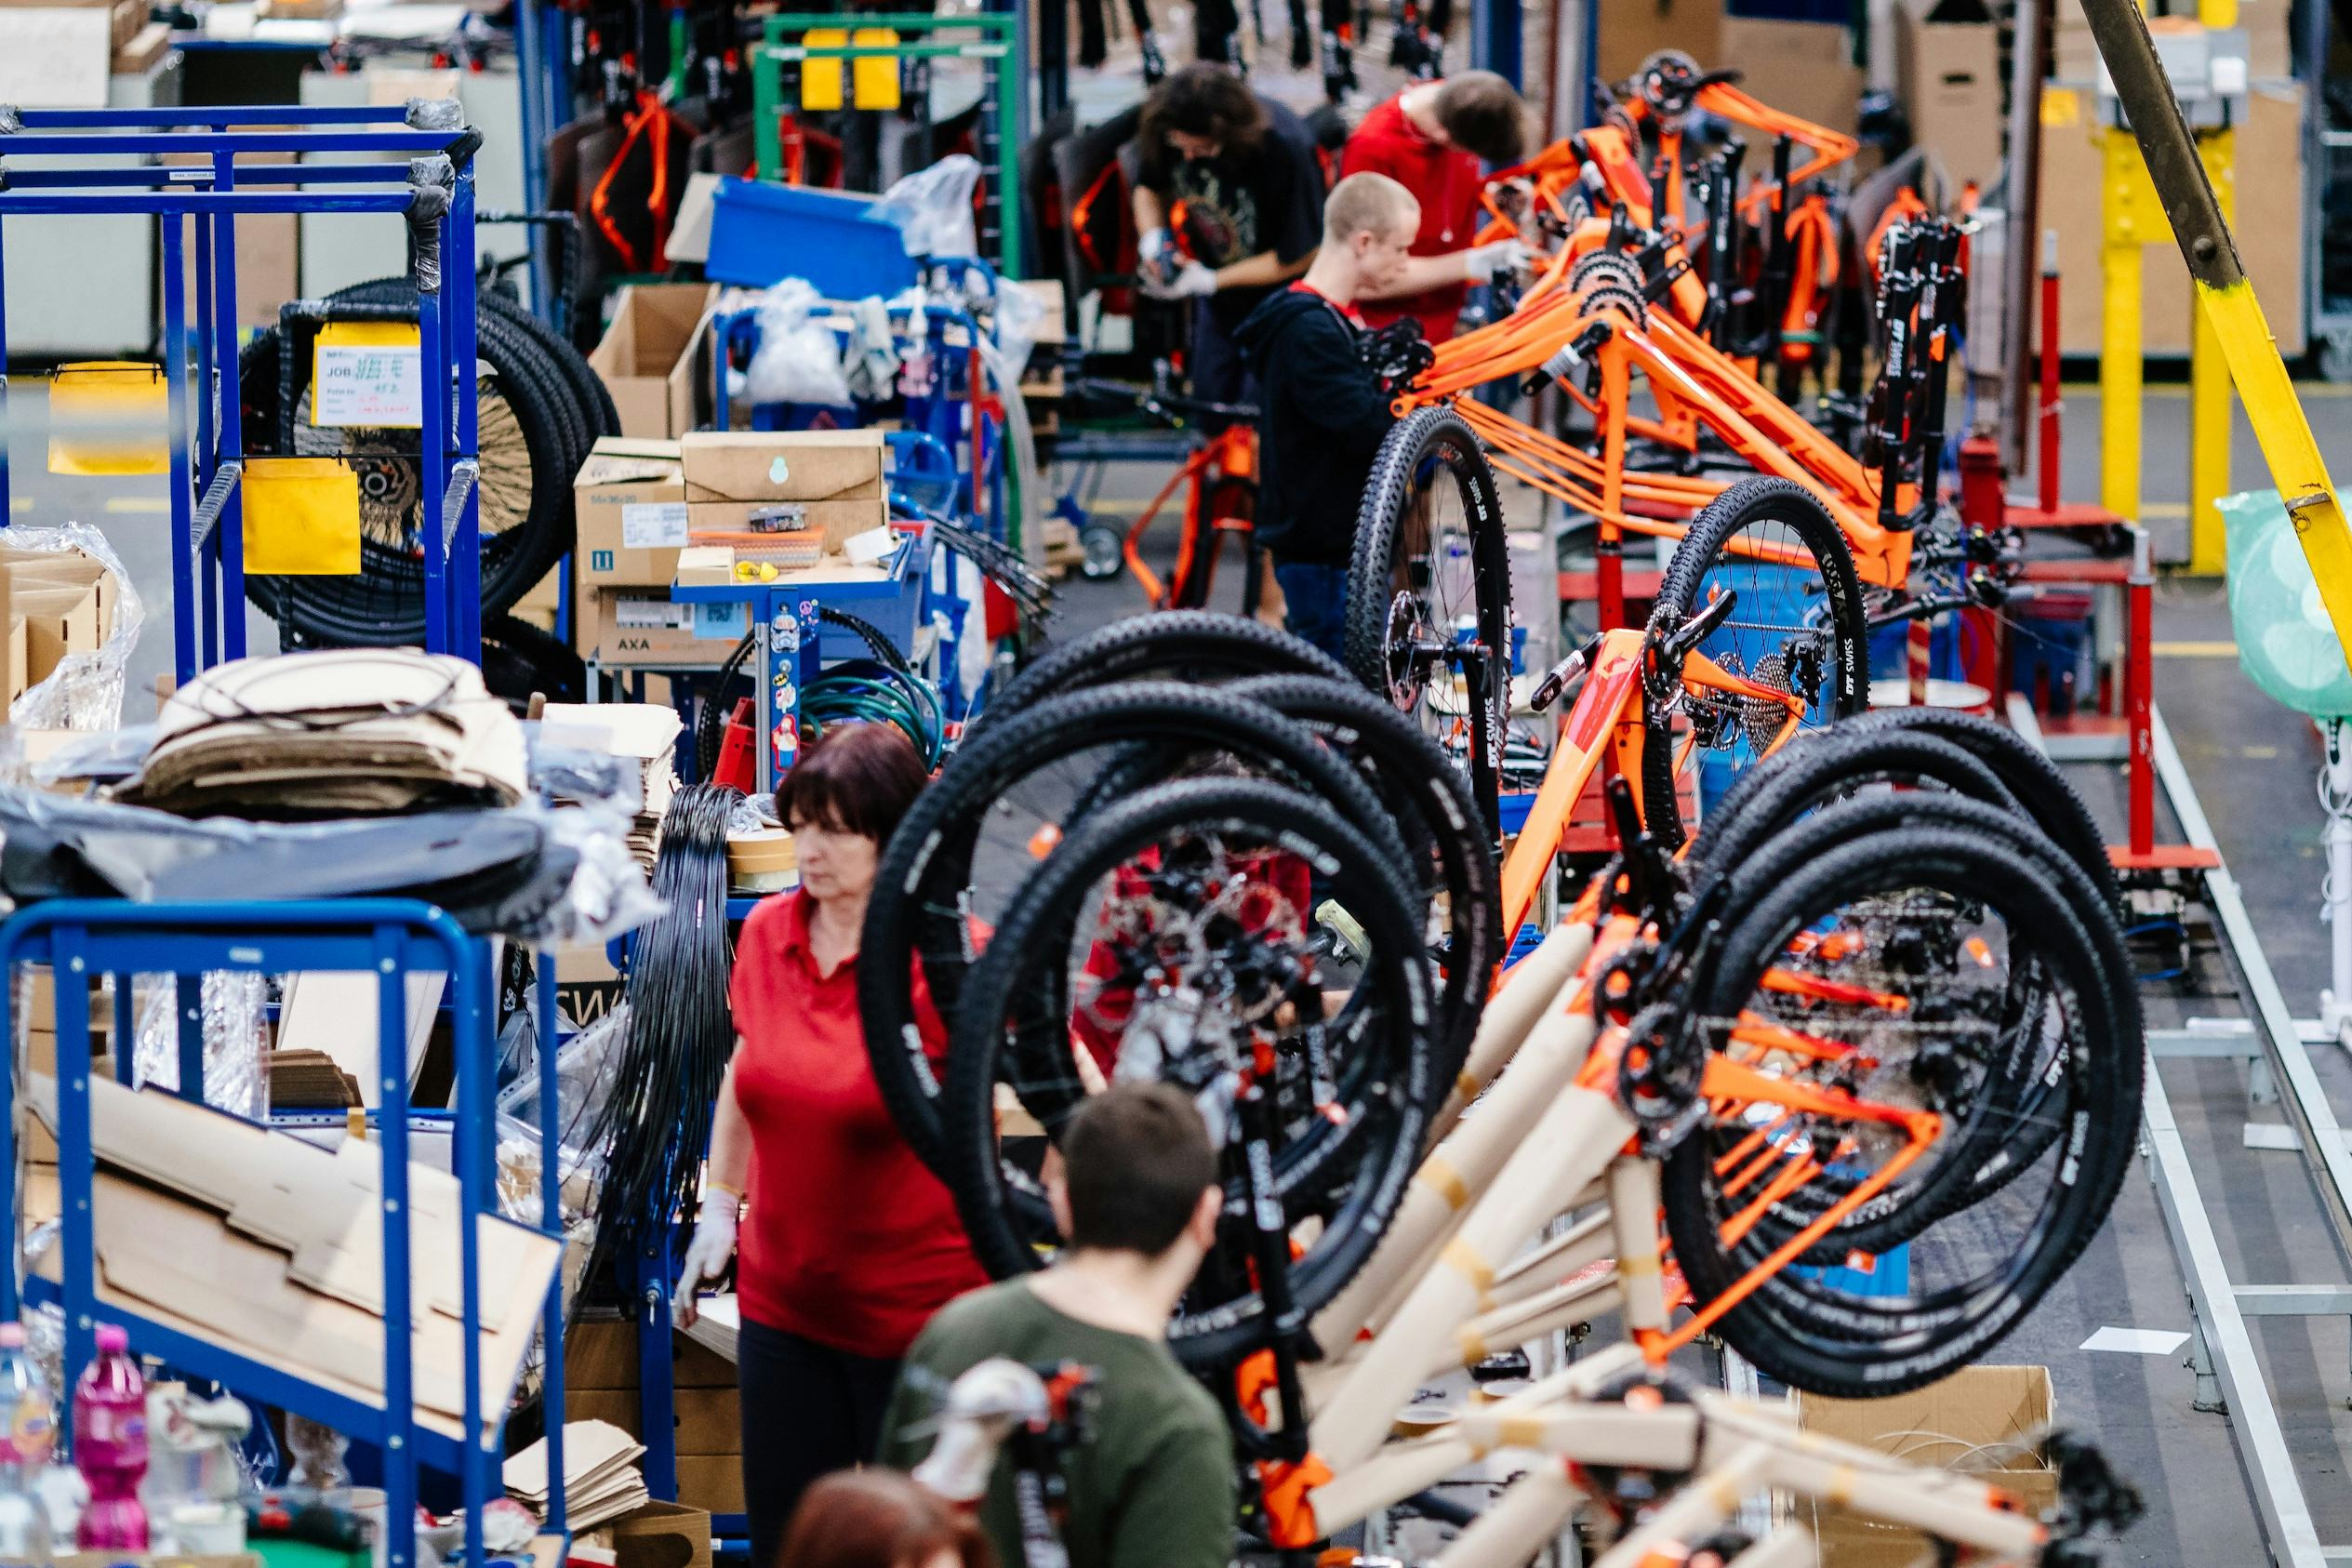 Despite an interruption in production due to the Covid-19 pandemic, Bike Fun International, has reported record sales figures for the fiscal year 2019/2020. - Photo BFI 